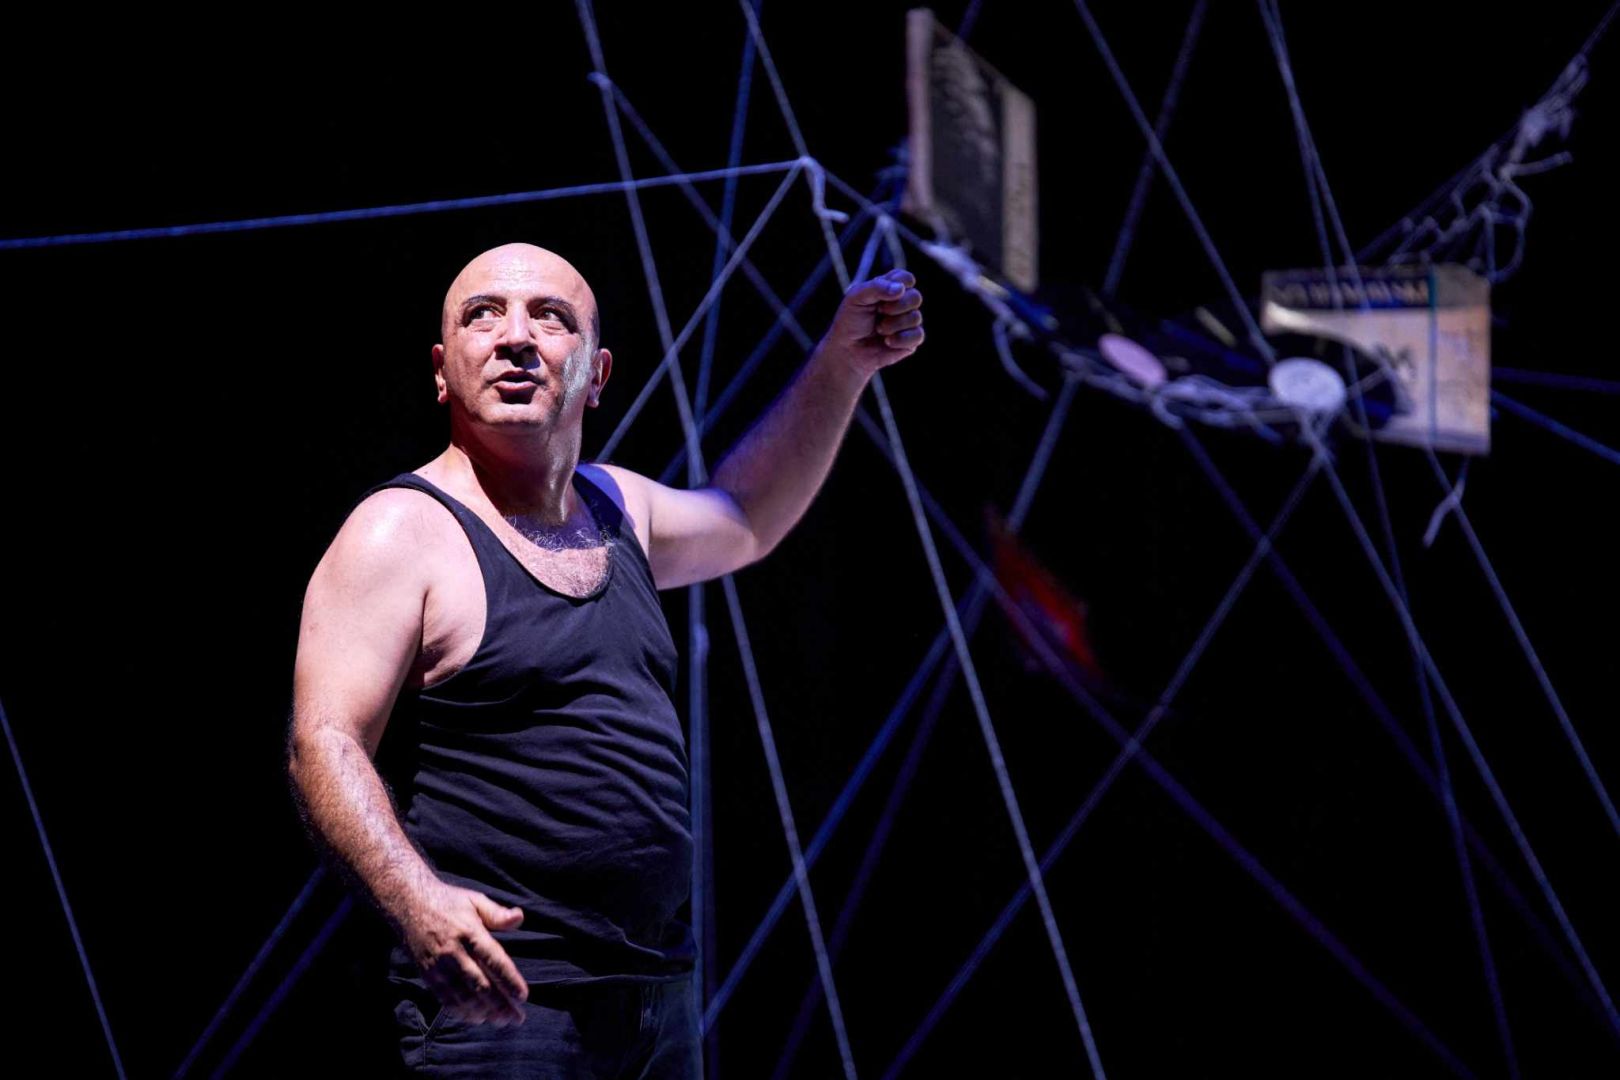 Azerbaijan's Honored Artist to perform one-man show in Germany